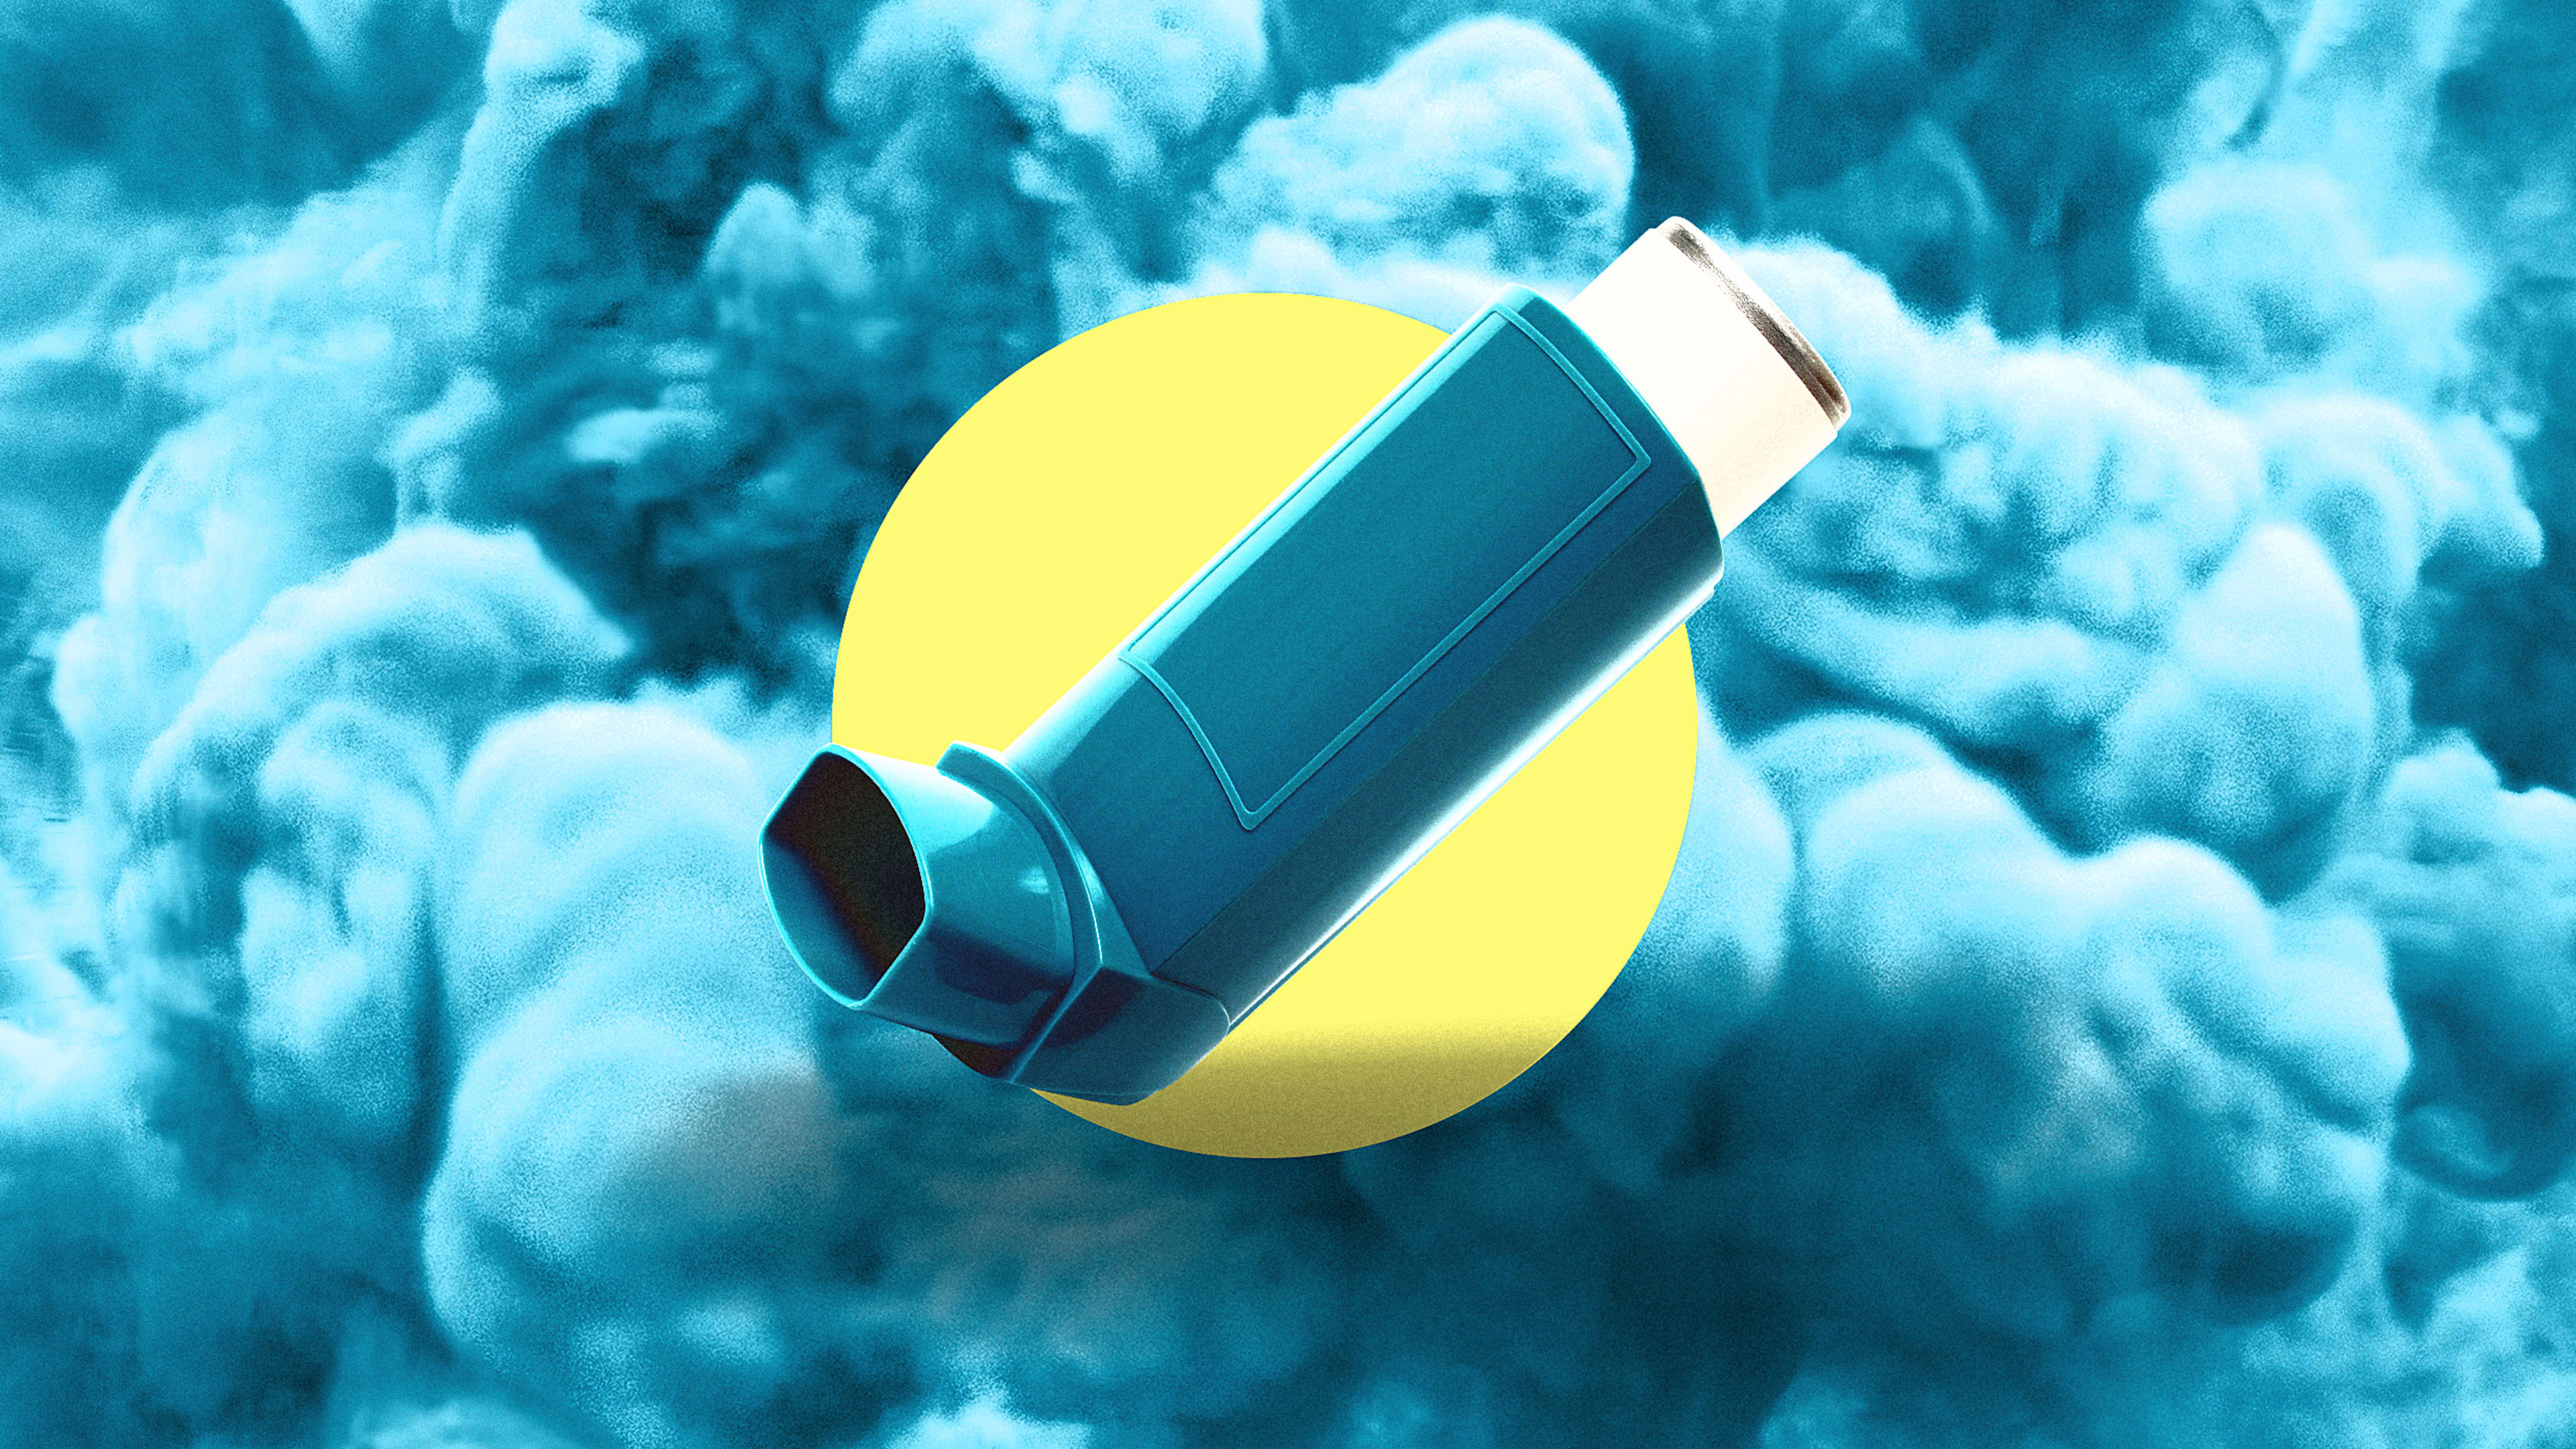 Asthma inhalers create a shocking amount of emissions. This major drug company is redesigning them